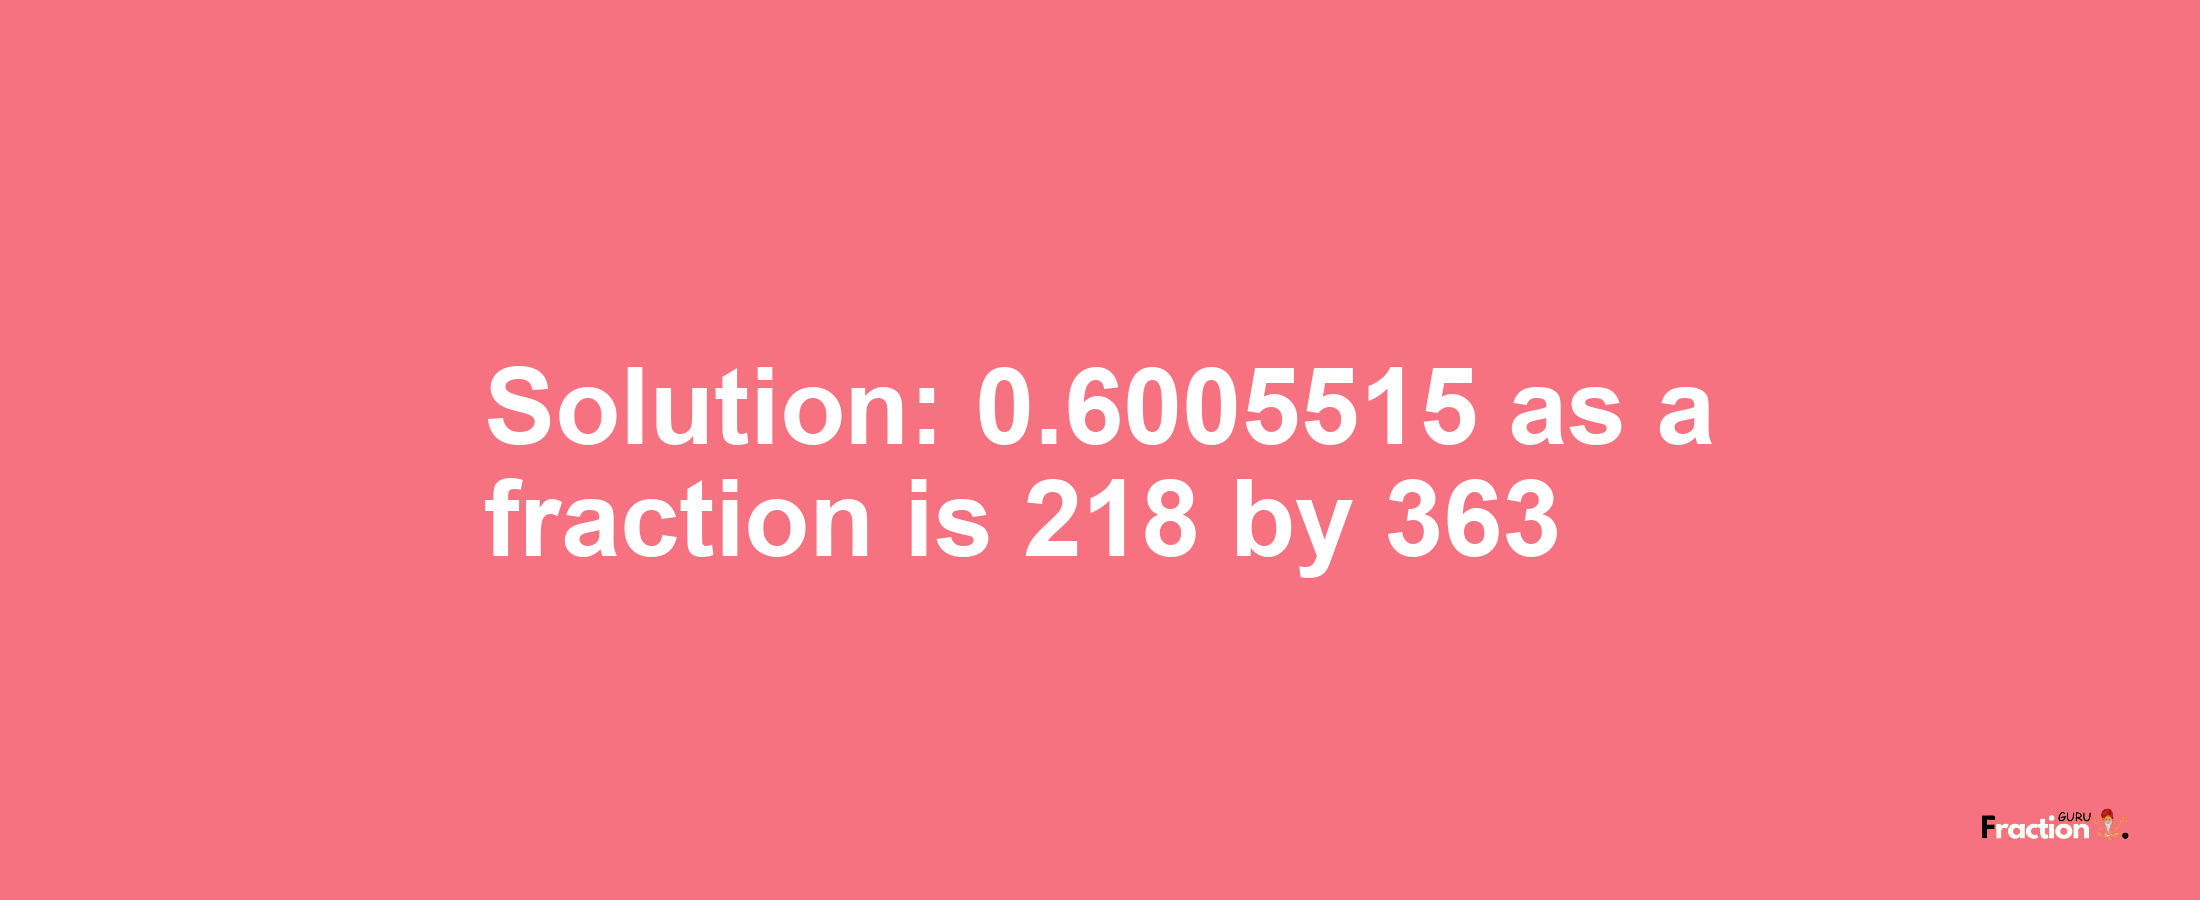 Solution:0.6005515 as a fraction is 218/363